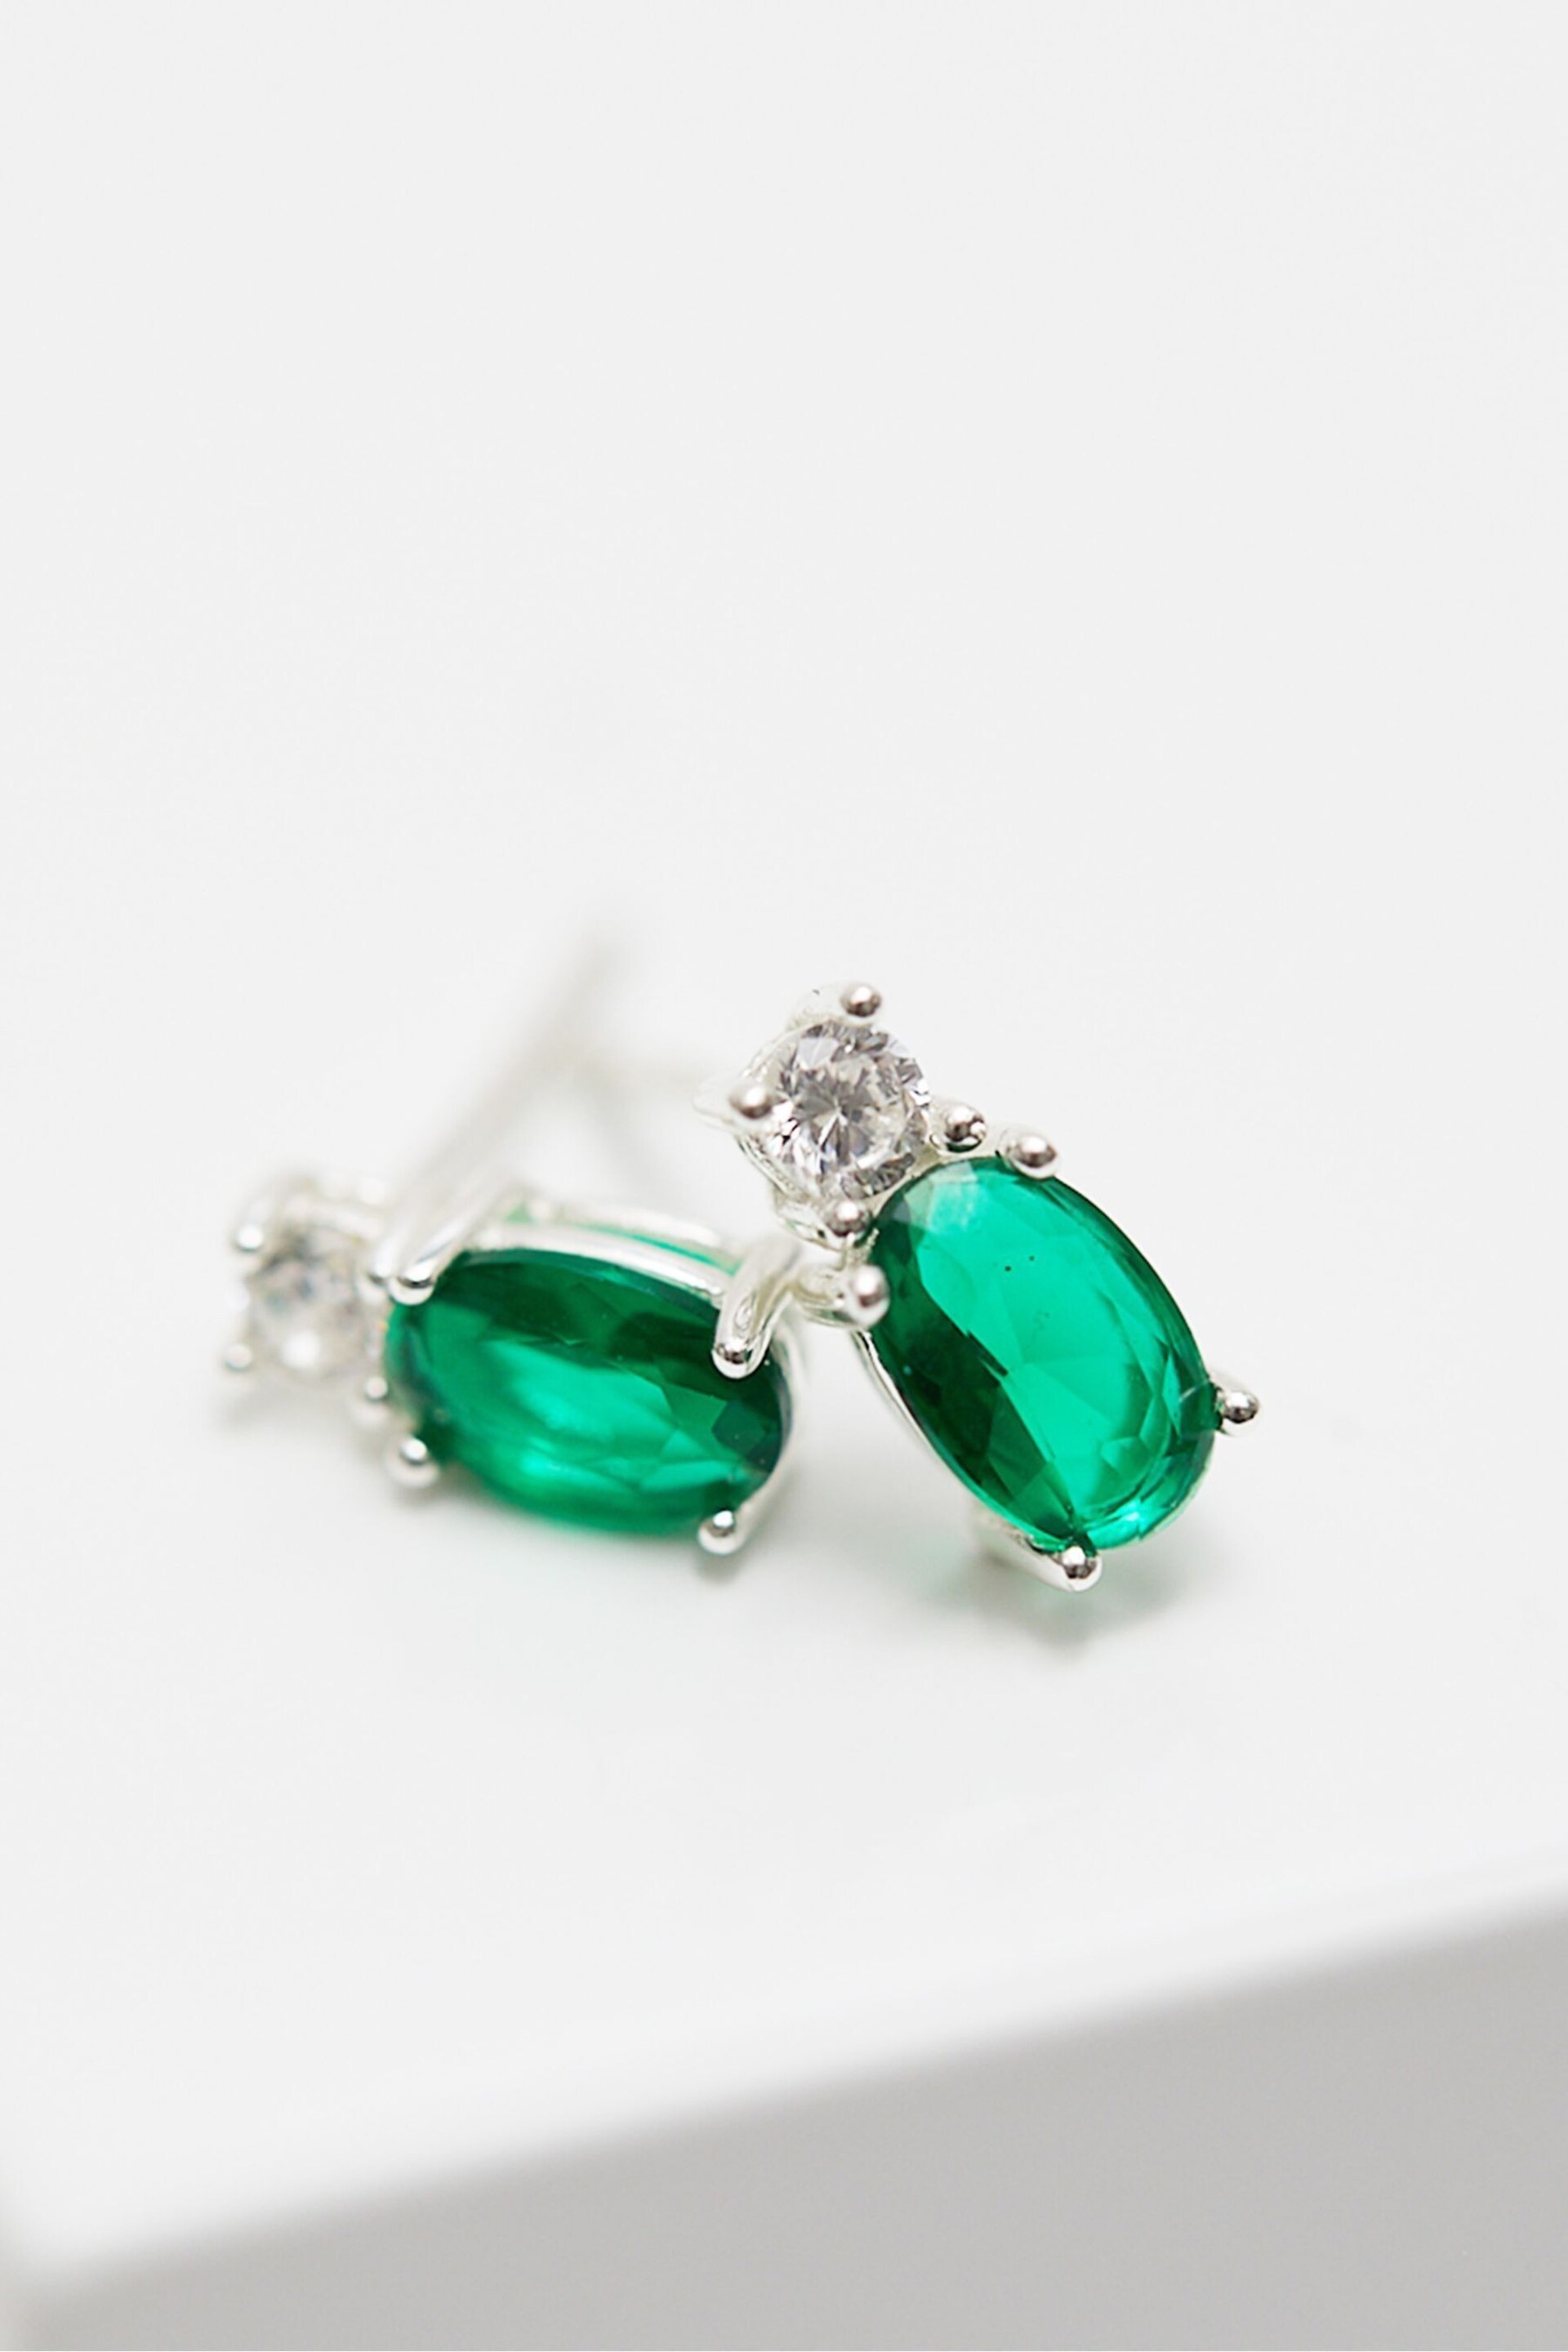 Simply Silver Sterling Silver Tone 925 Emerald Earrings - Image 3 of 3